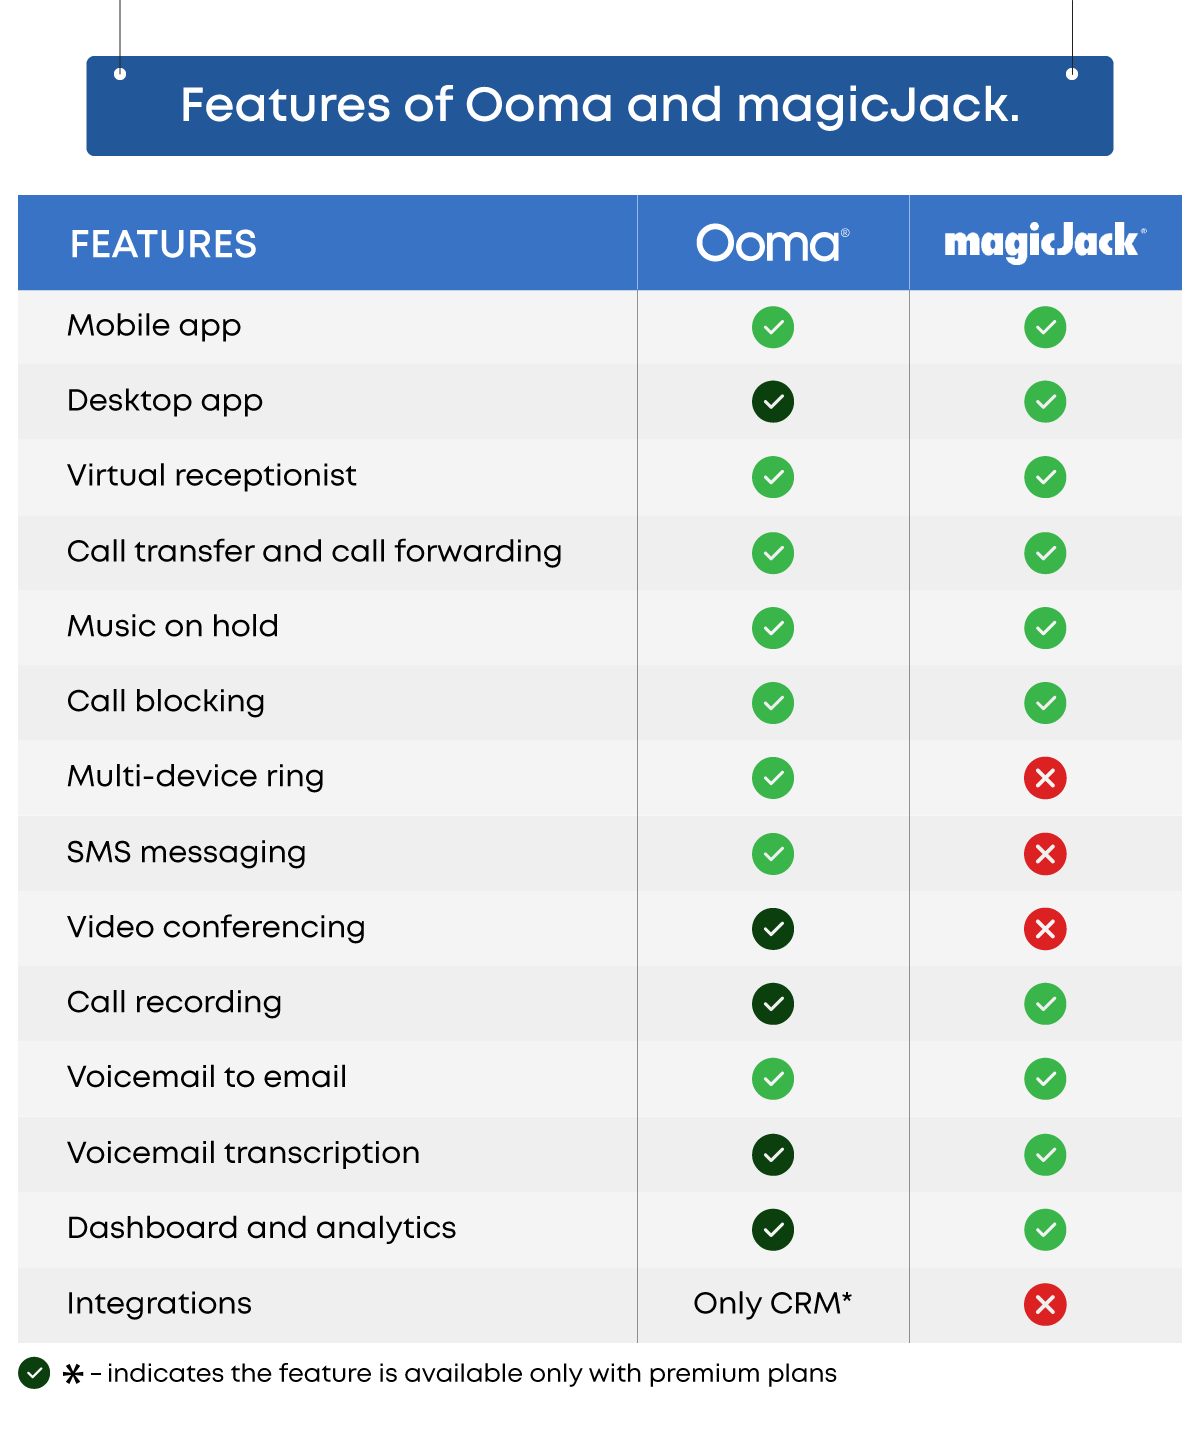 features that Ooma and magicJack offer